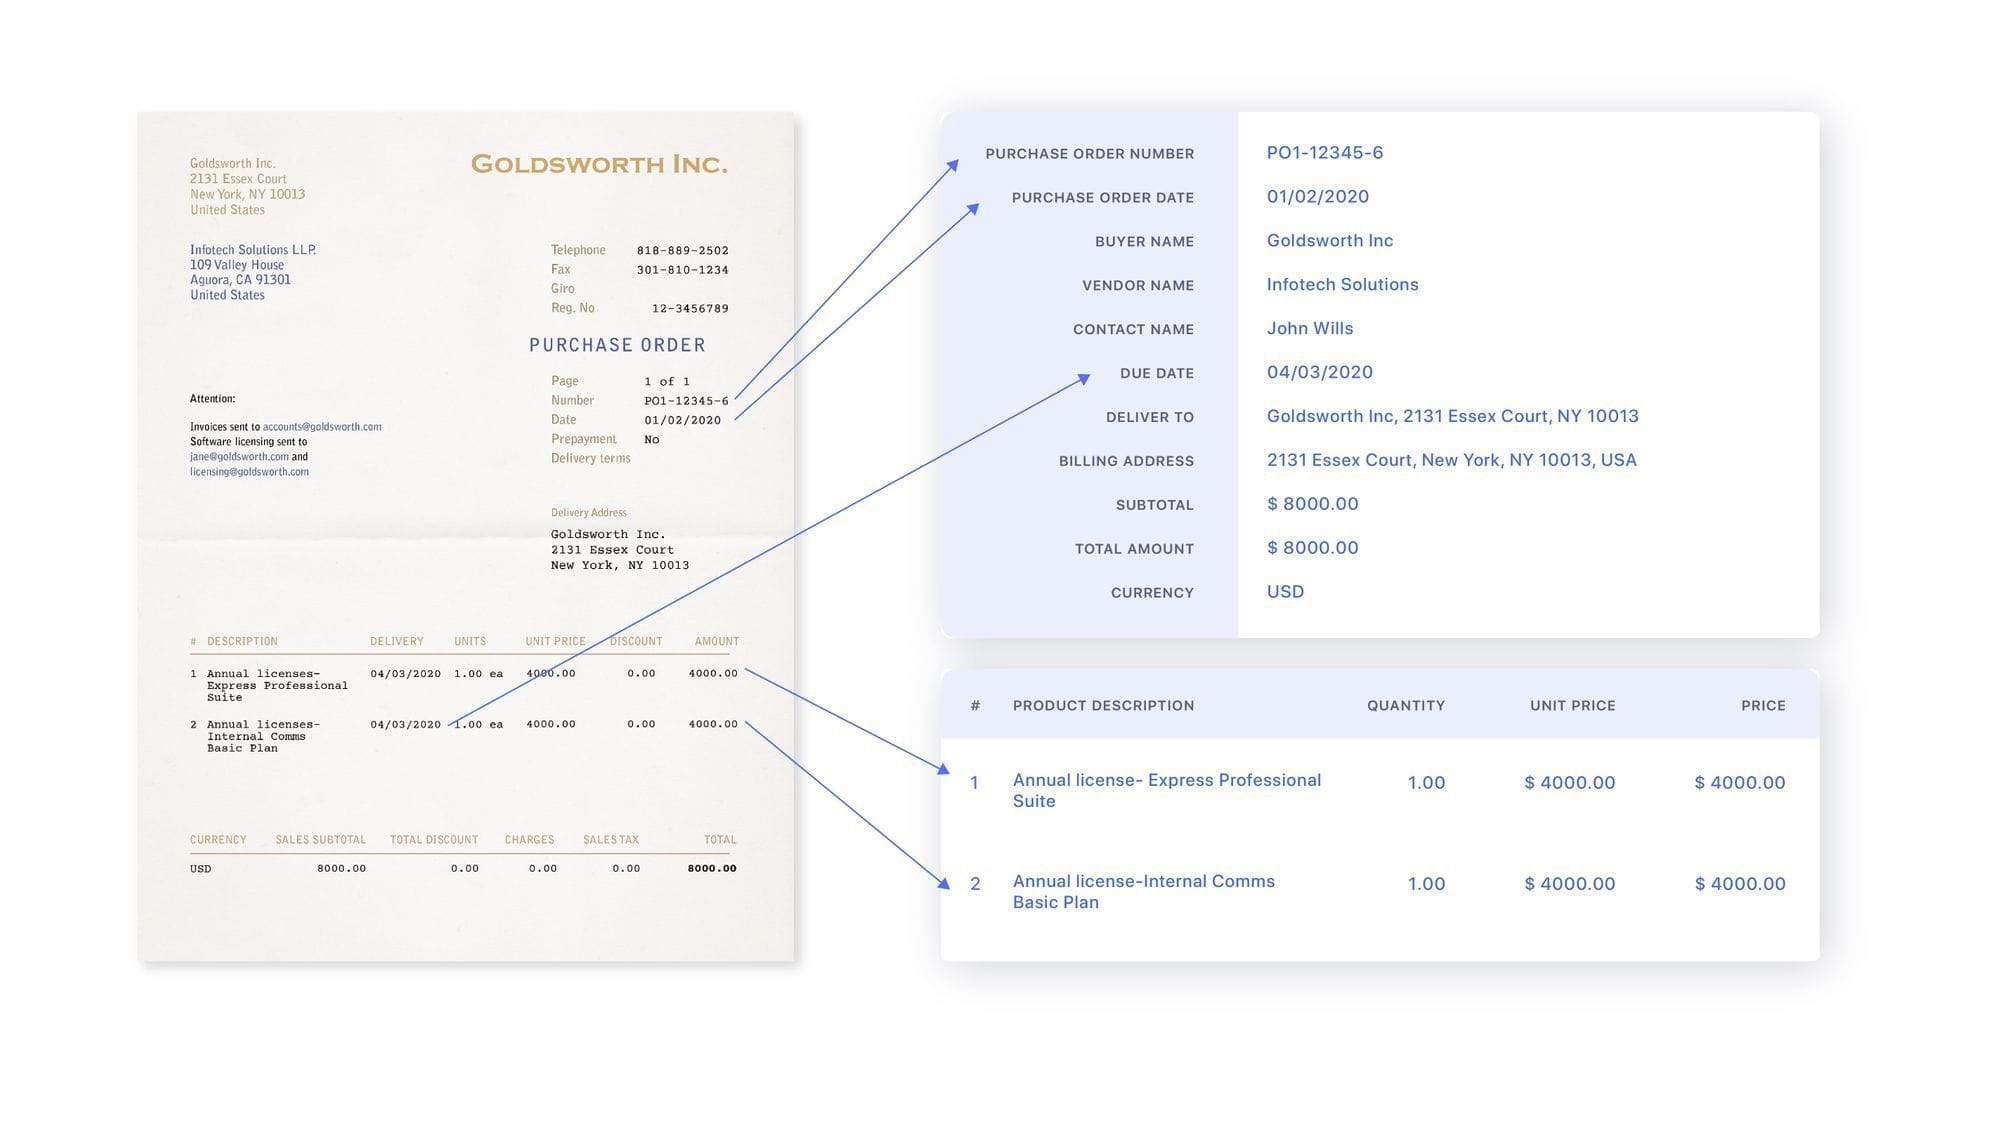 Here's a quick glimpse into how AI and OCR combine to extract invoice data